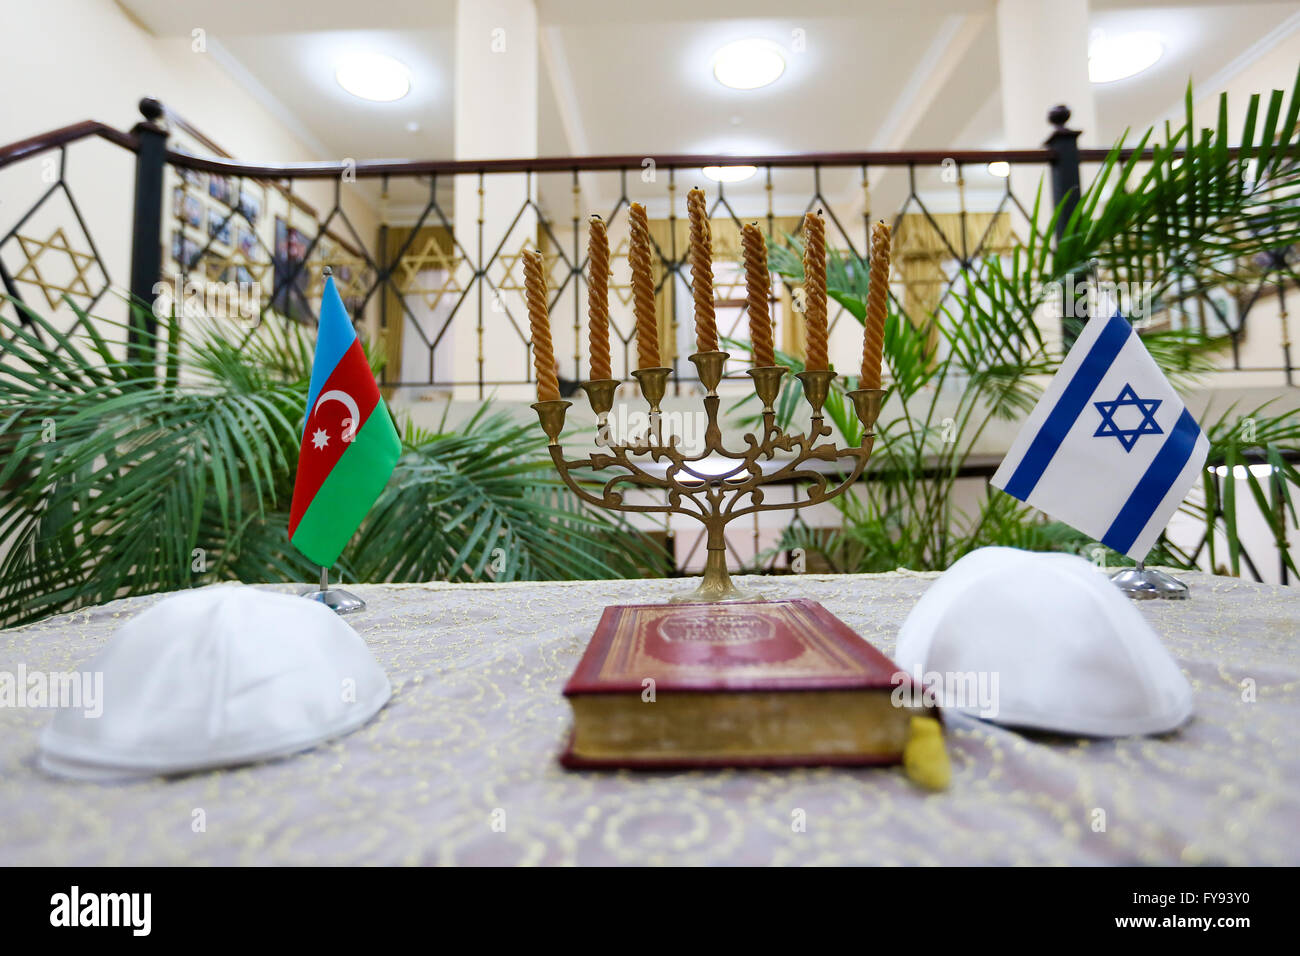 Baku, Azerbaijan. 22nd Apr, 2016. Azerbaijan and Israel flags in Baku's synagogue. Mountain Jews speak their own dialect called Judeo-Tat and are believed by some to be descendents from the ten lost tribes who were exiled from Israel in 722BCE and settled in the Caucasus Mountains. Credit:  Aziz Karimov/Pacific Press/Alamy Live News Stock Photo